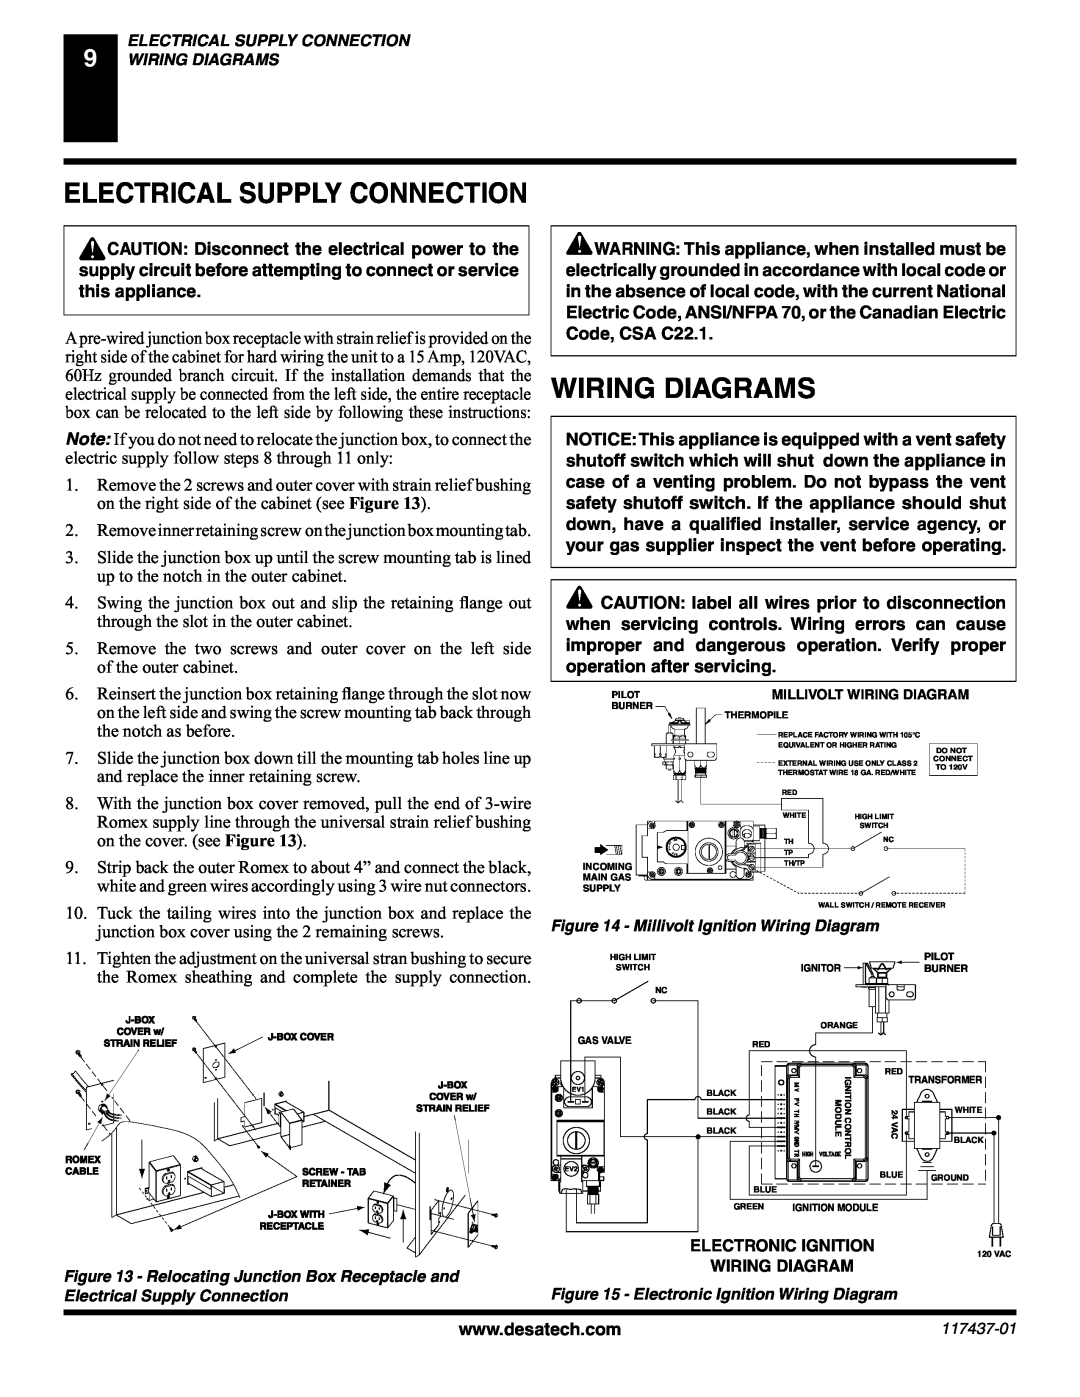 Desa (V) CB36(N installation manual Electrical Supply Connection, Wiring Diagrams, Electronic Ignition Wiring Diagram 